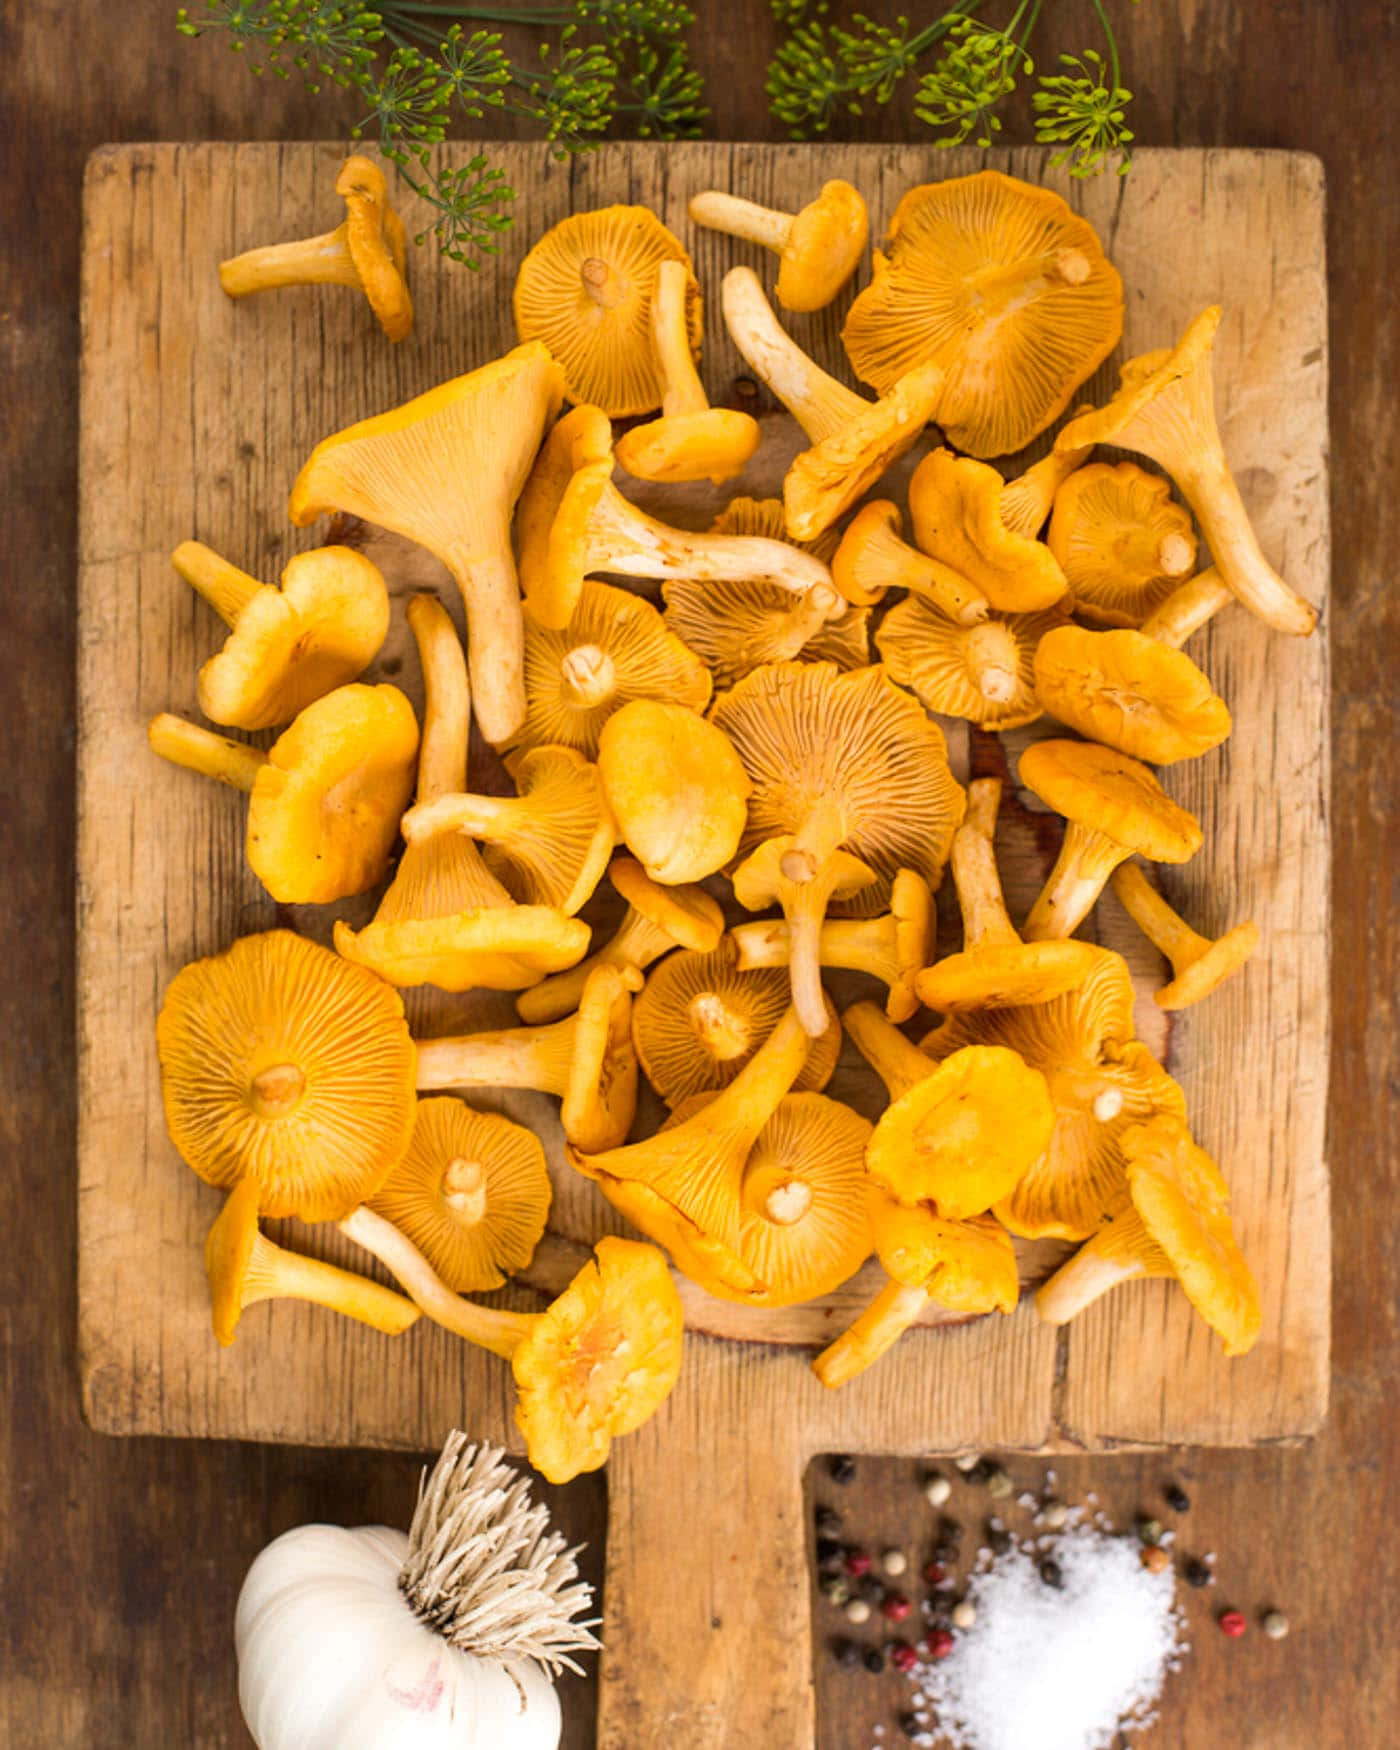 Assorted Mushroom Types in Natural Environment